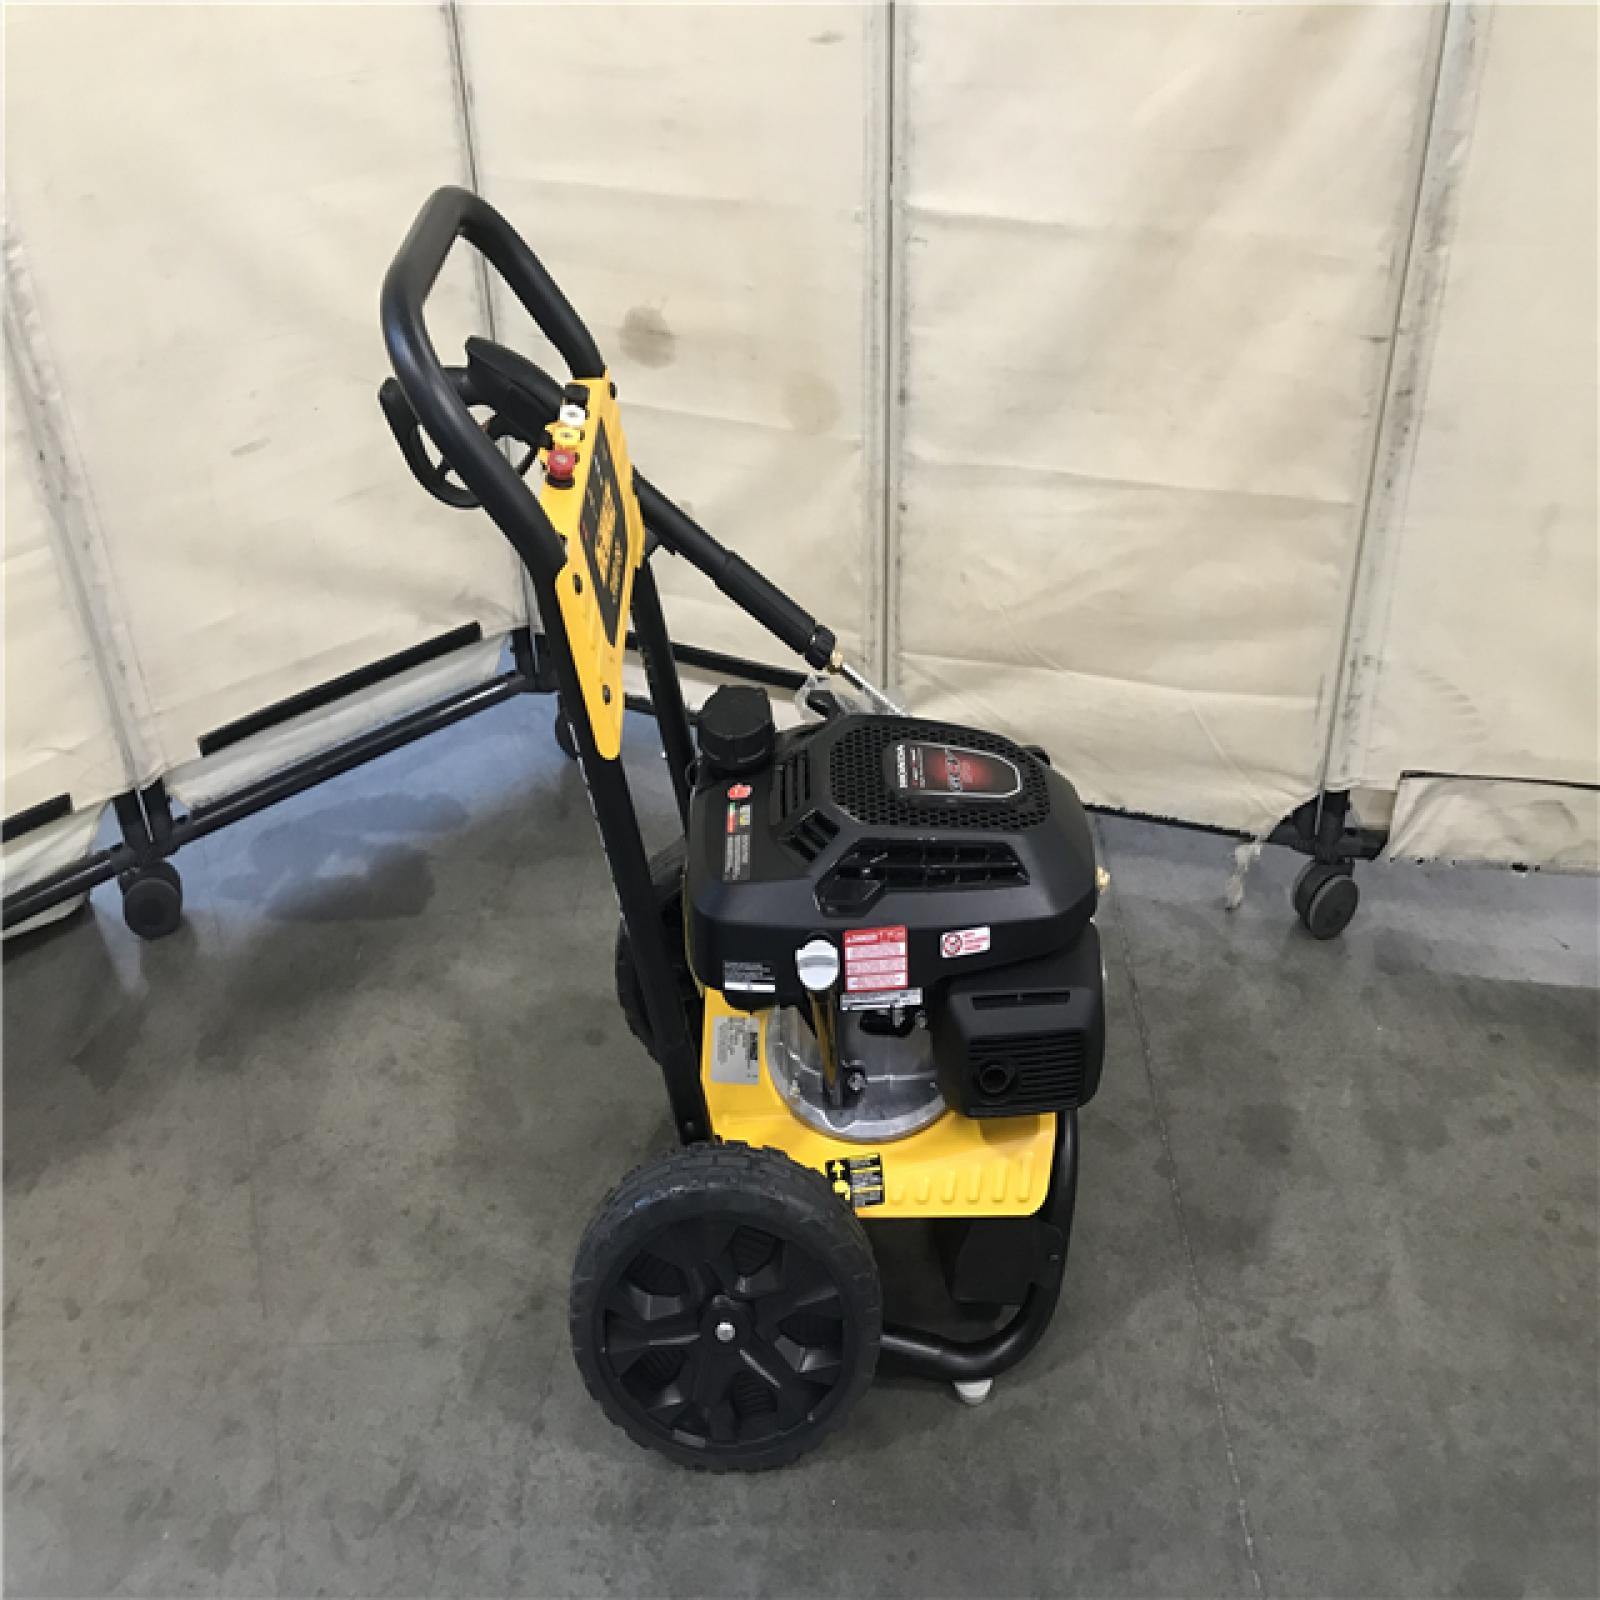 California AS-IS DEWALT 3100 PSI 2.3 GPM Gas Cold Water Professional Pressure Washer with HONDA GCV170 Engine